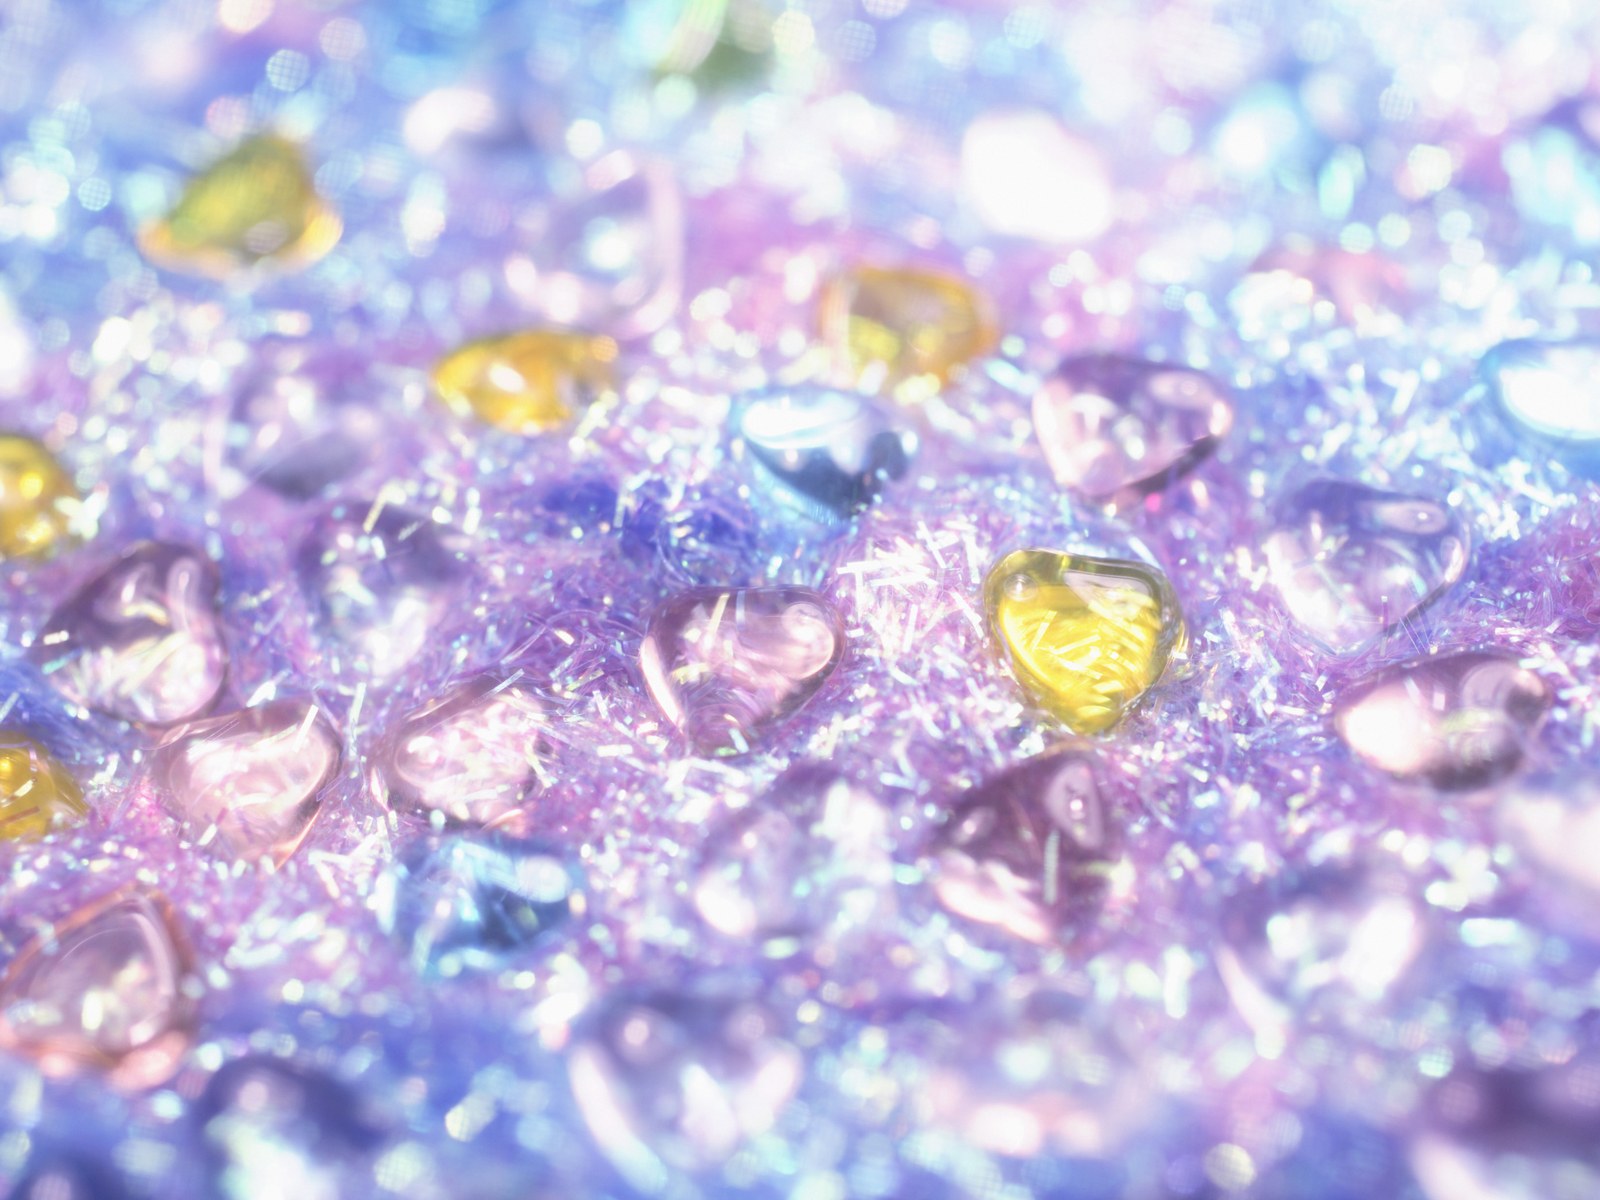 Sparkling Diamonds and Crystals - Romantic Sparkling Backgrounds ...